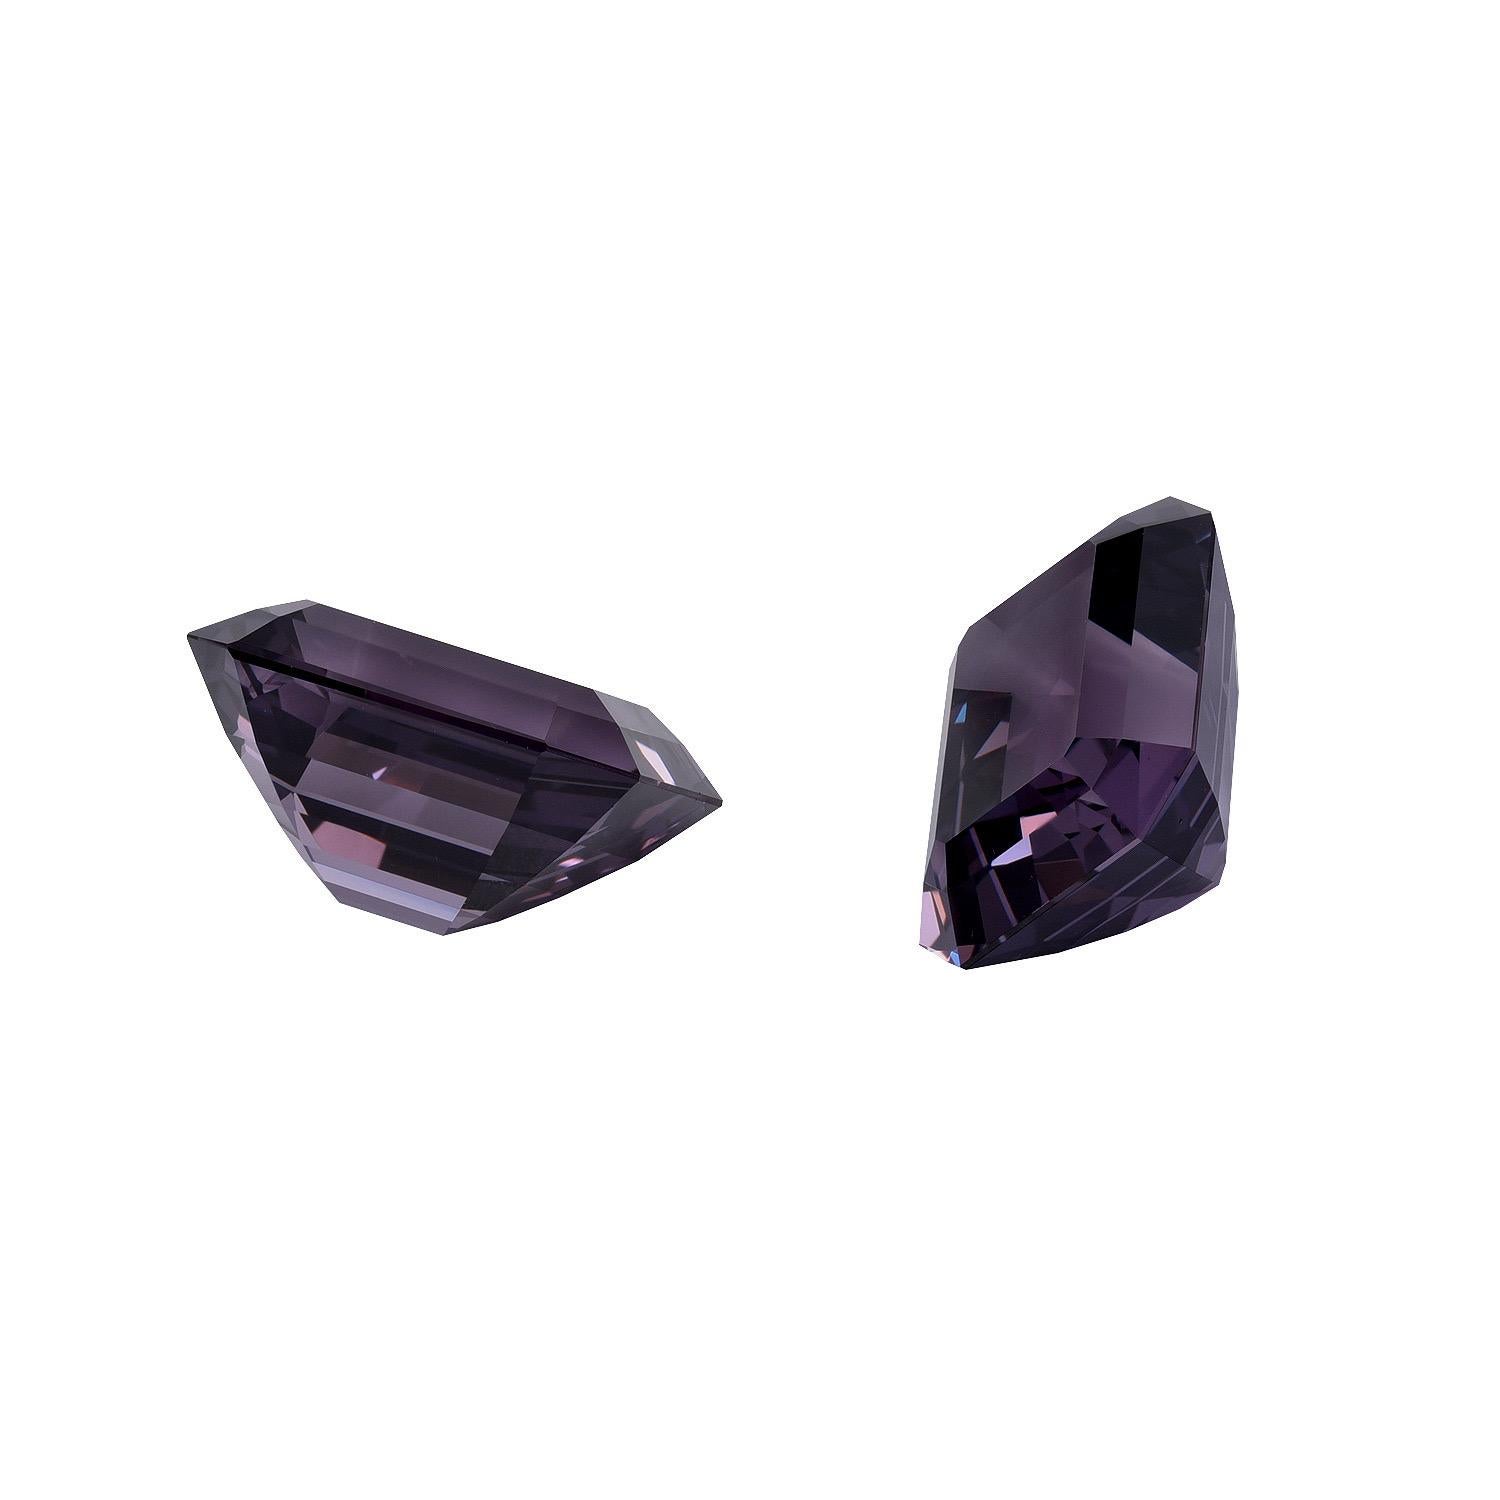 Supreme Grey-Lavender Spinel earring, emerald-cut gems, weighing a total of 13.12 carats, offered loose to a devoted gemstone collector. This pair exemplifies superb cutting, clarity and size.
Returns are accepted and paid by us within 7 days of